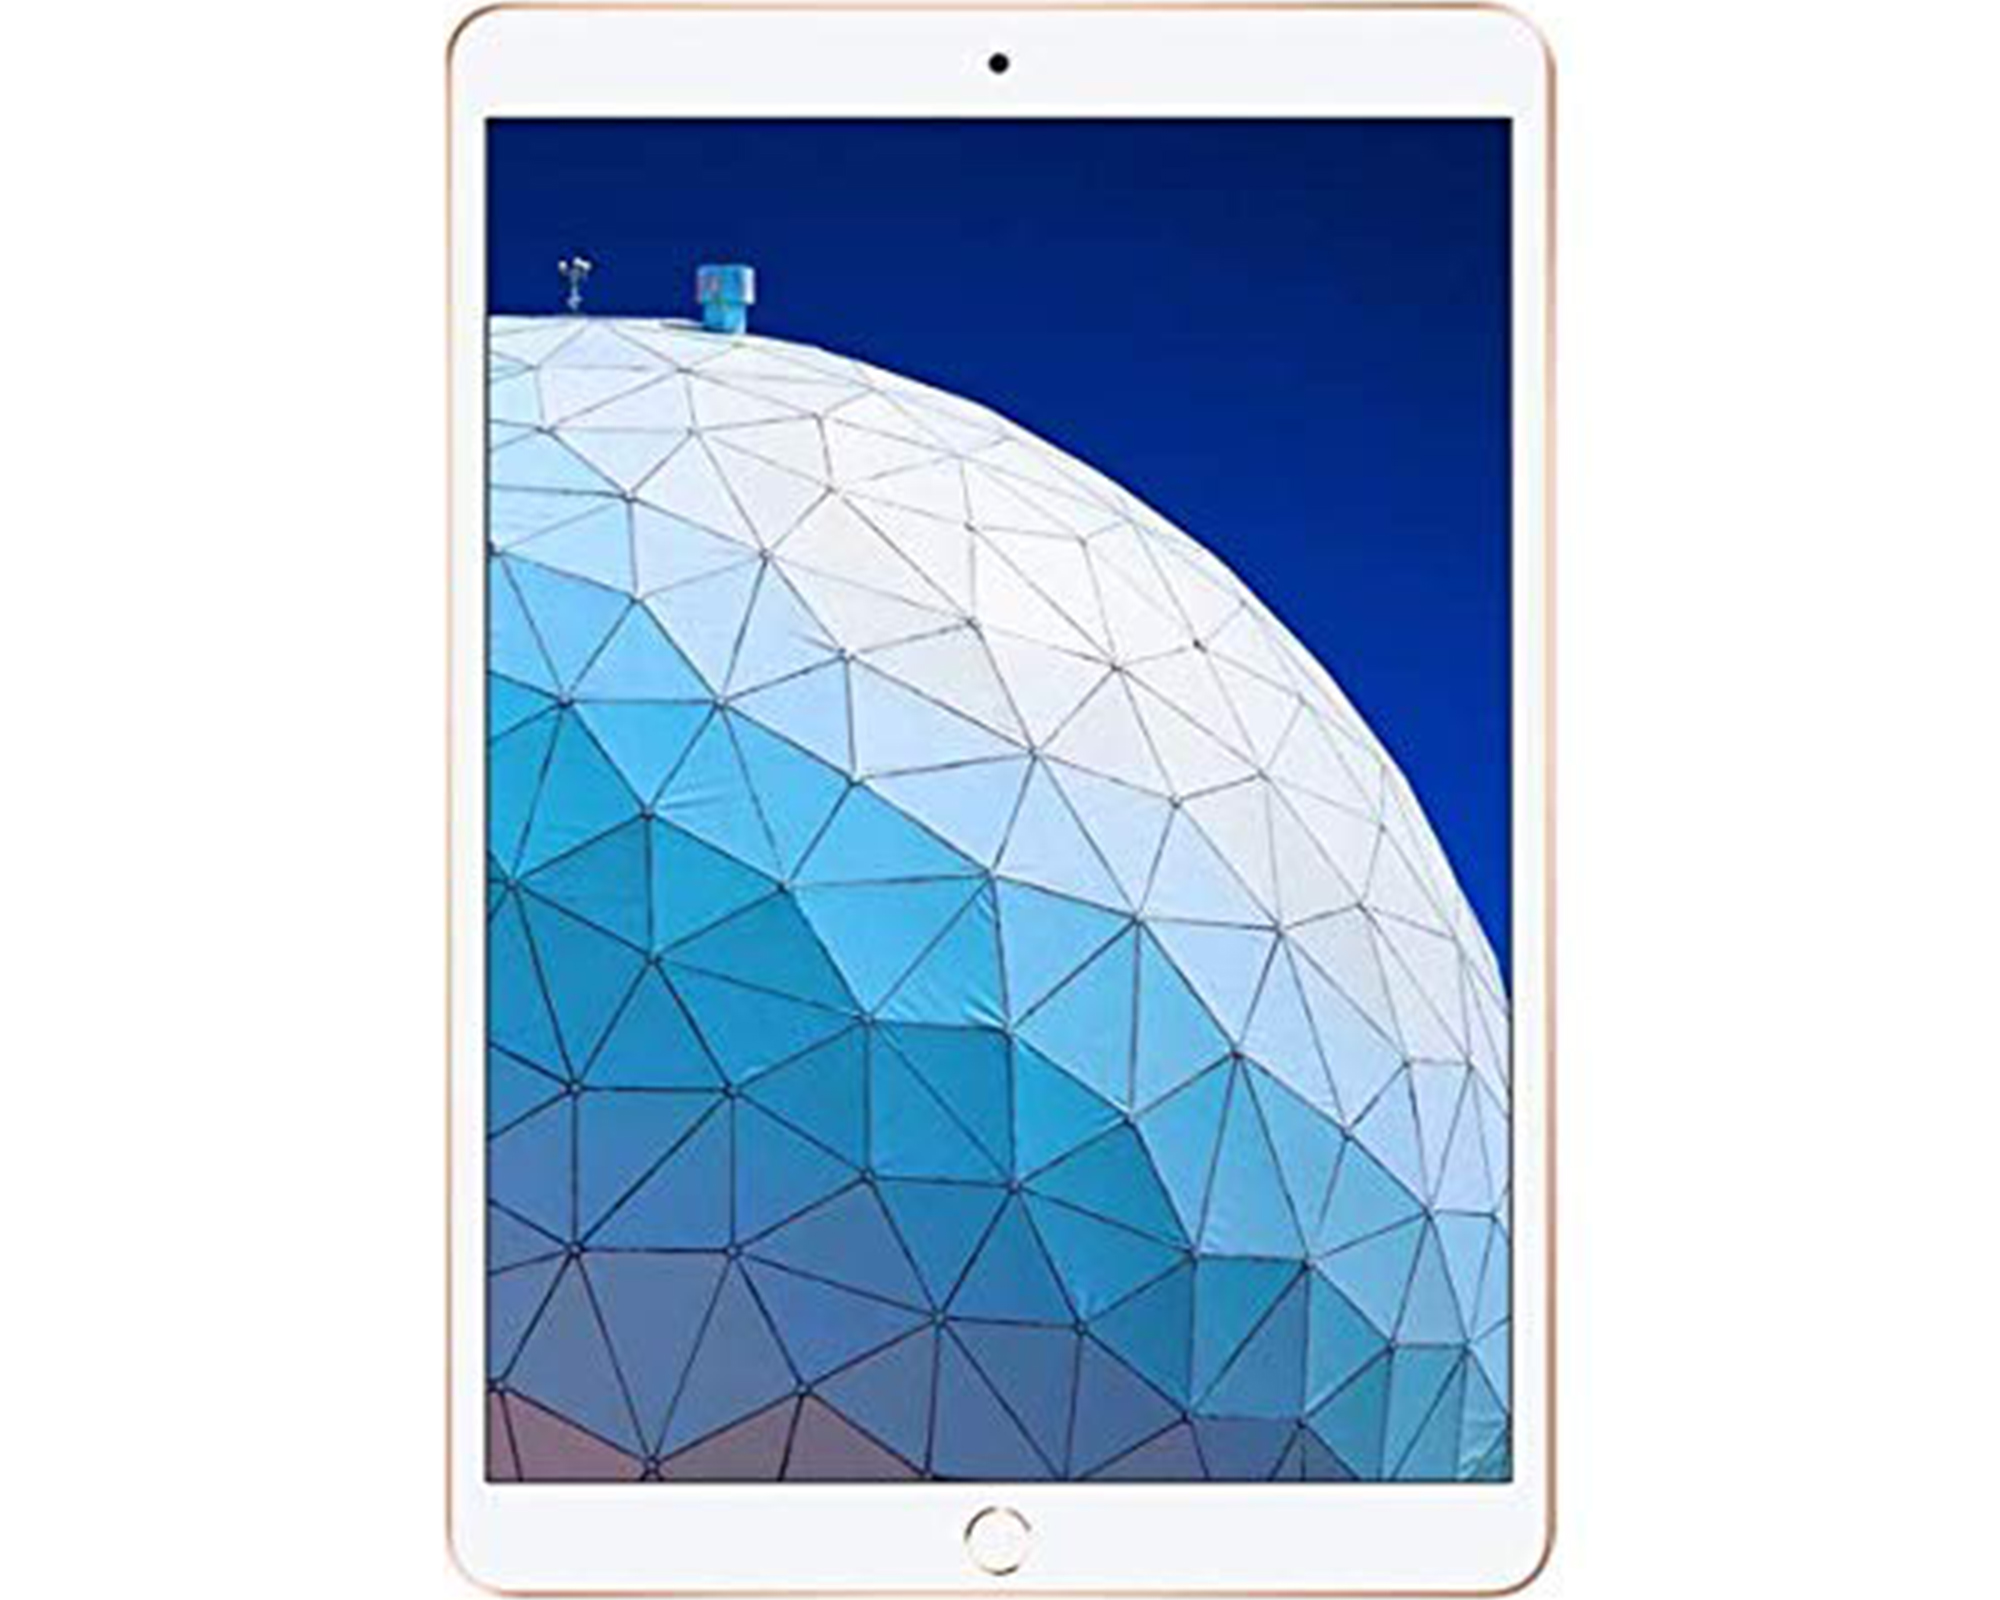 Open Box | Apple iPad Air 3 | 10.5-inch Retina Display | 64GB | Latest OS, Wi-Fi Only, Bundle: Case, Pre-Installed Tempered Glass, Bluetooth Headset, Stylus Pen, Rapid Charger - image 5 of 12